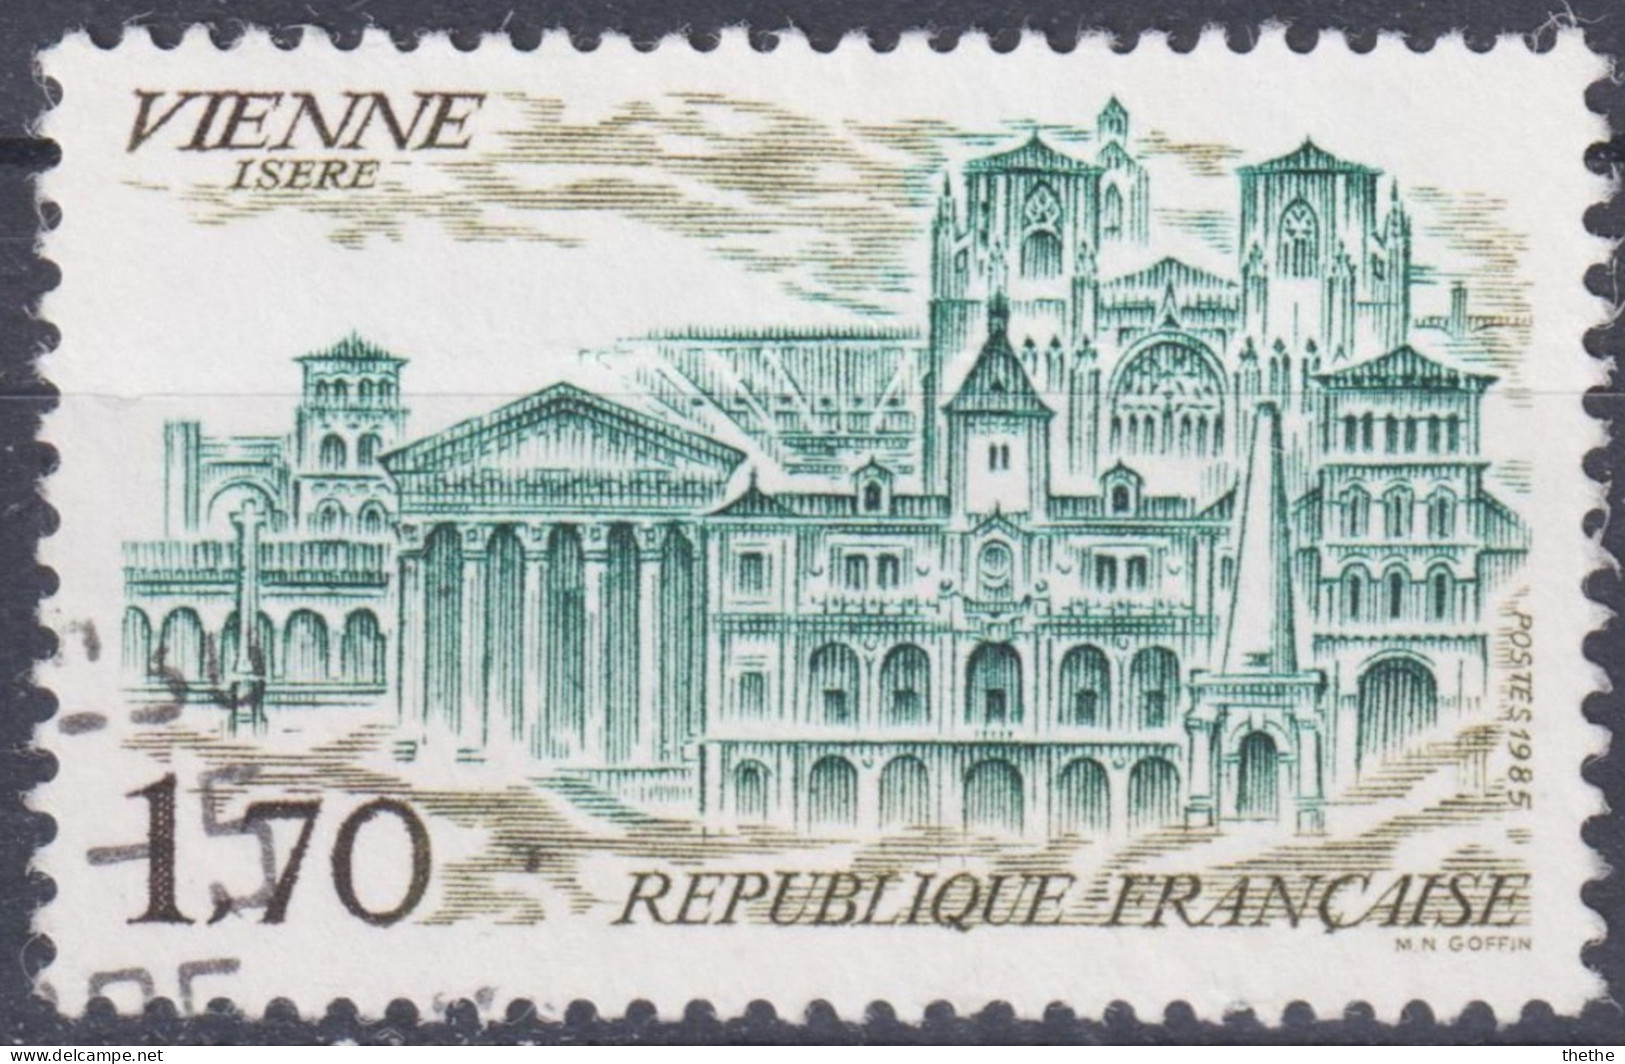 FRANCE - Vienne Isère - Used Stamps